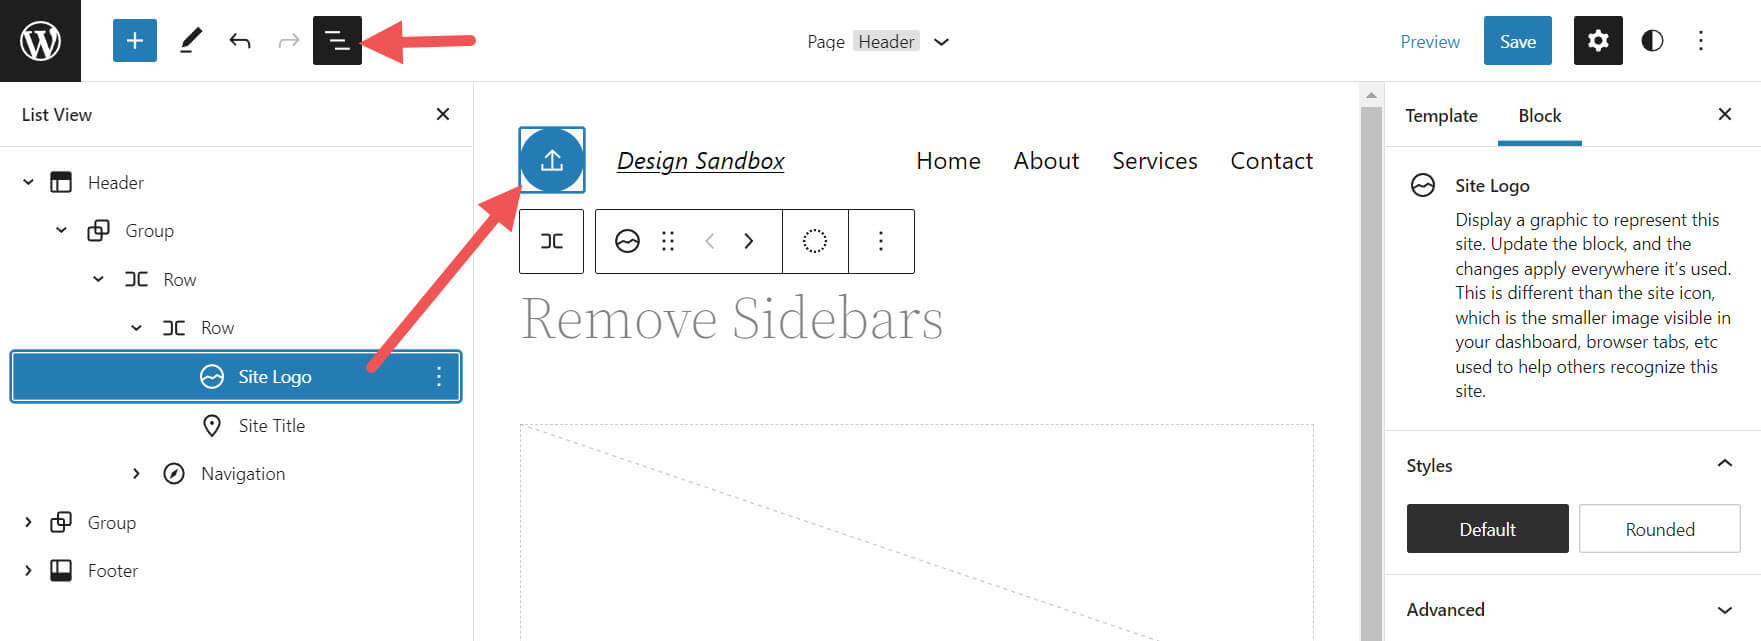 site logo in list view